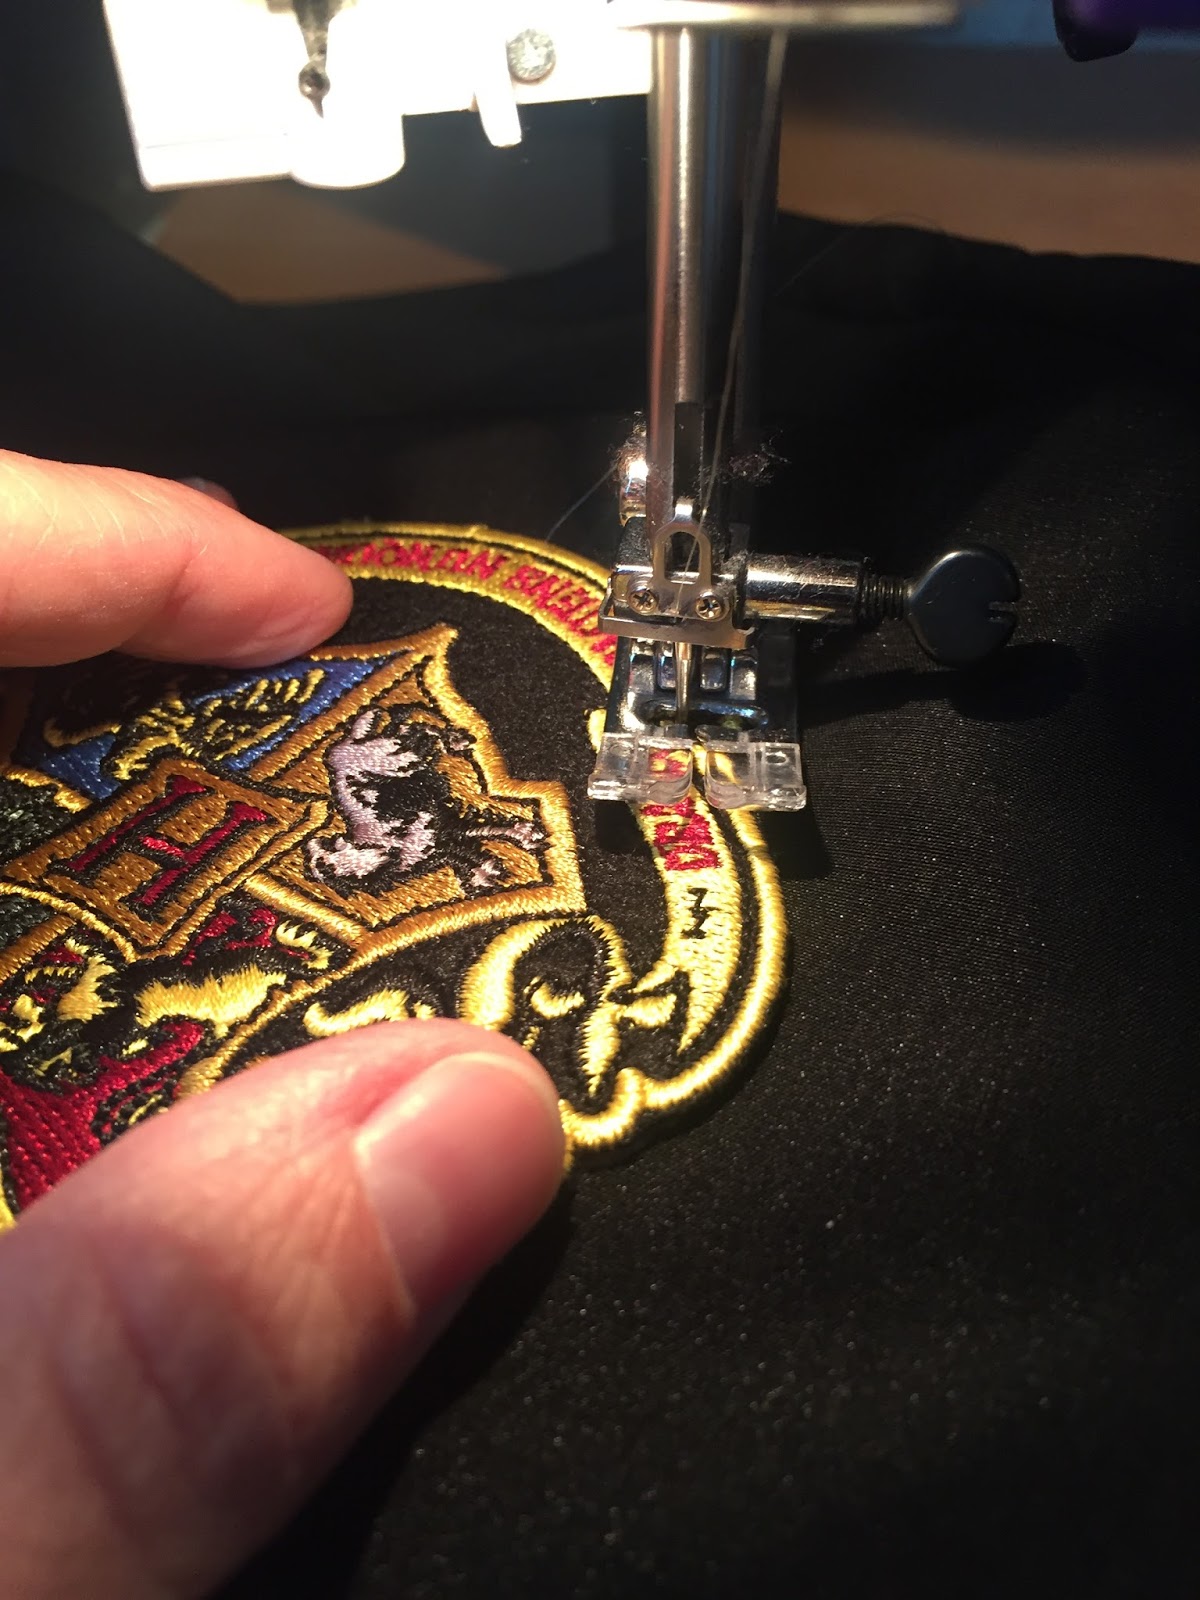 Any tips for sewing on patches? The patch is pretty thick : r/sewing